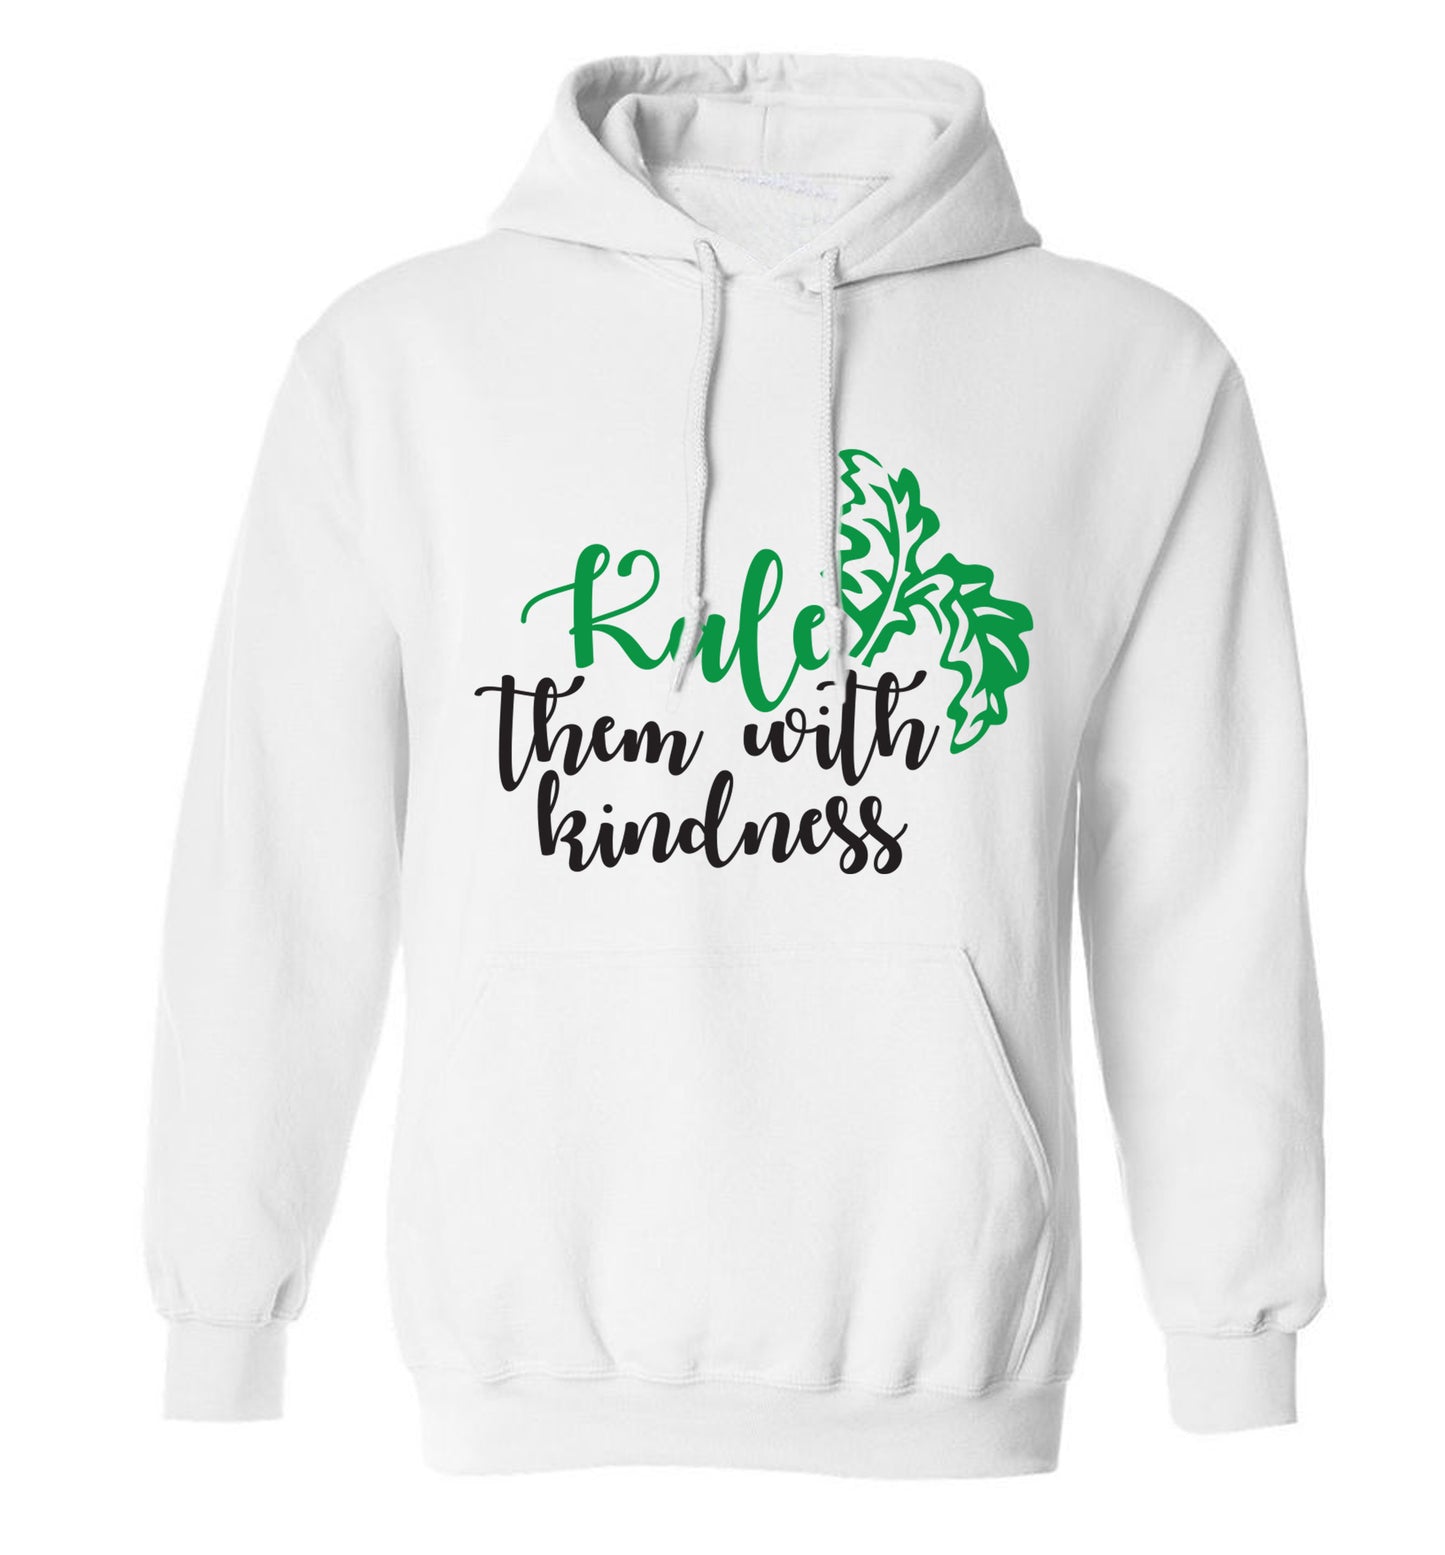 Kale them with kindness adults unisex white hoodie 2XL